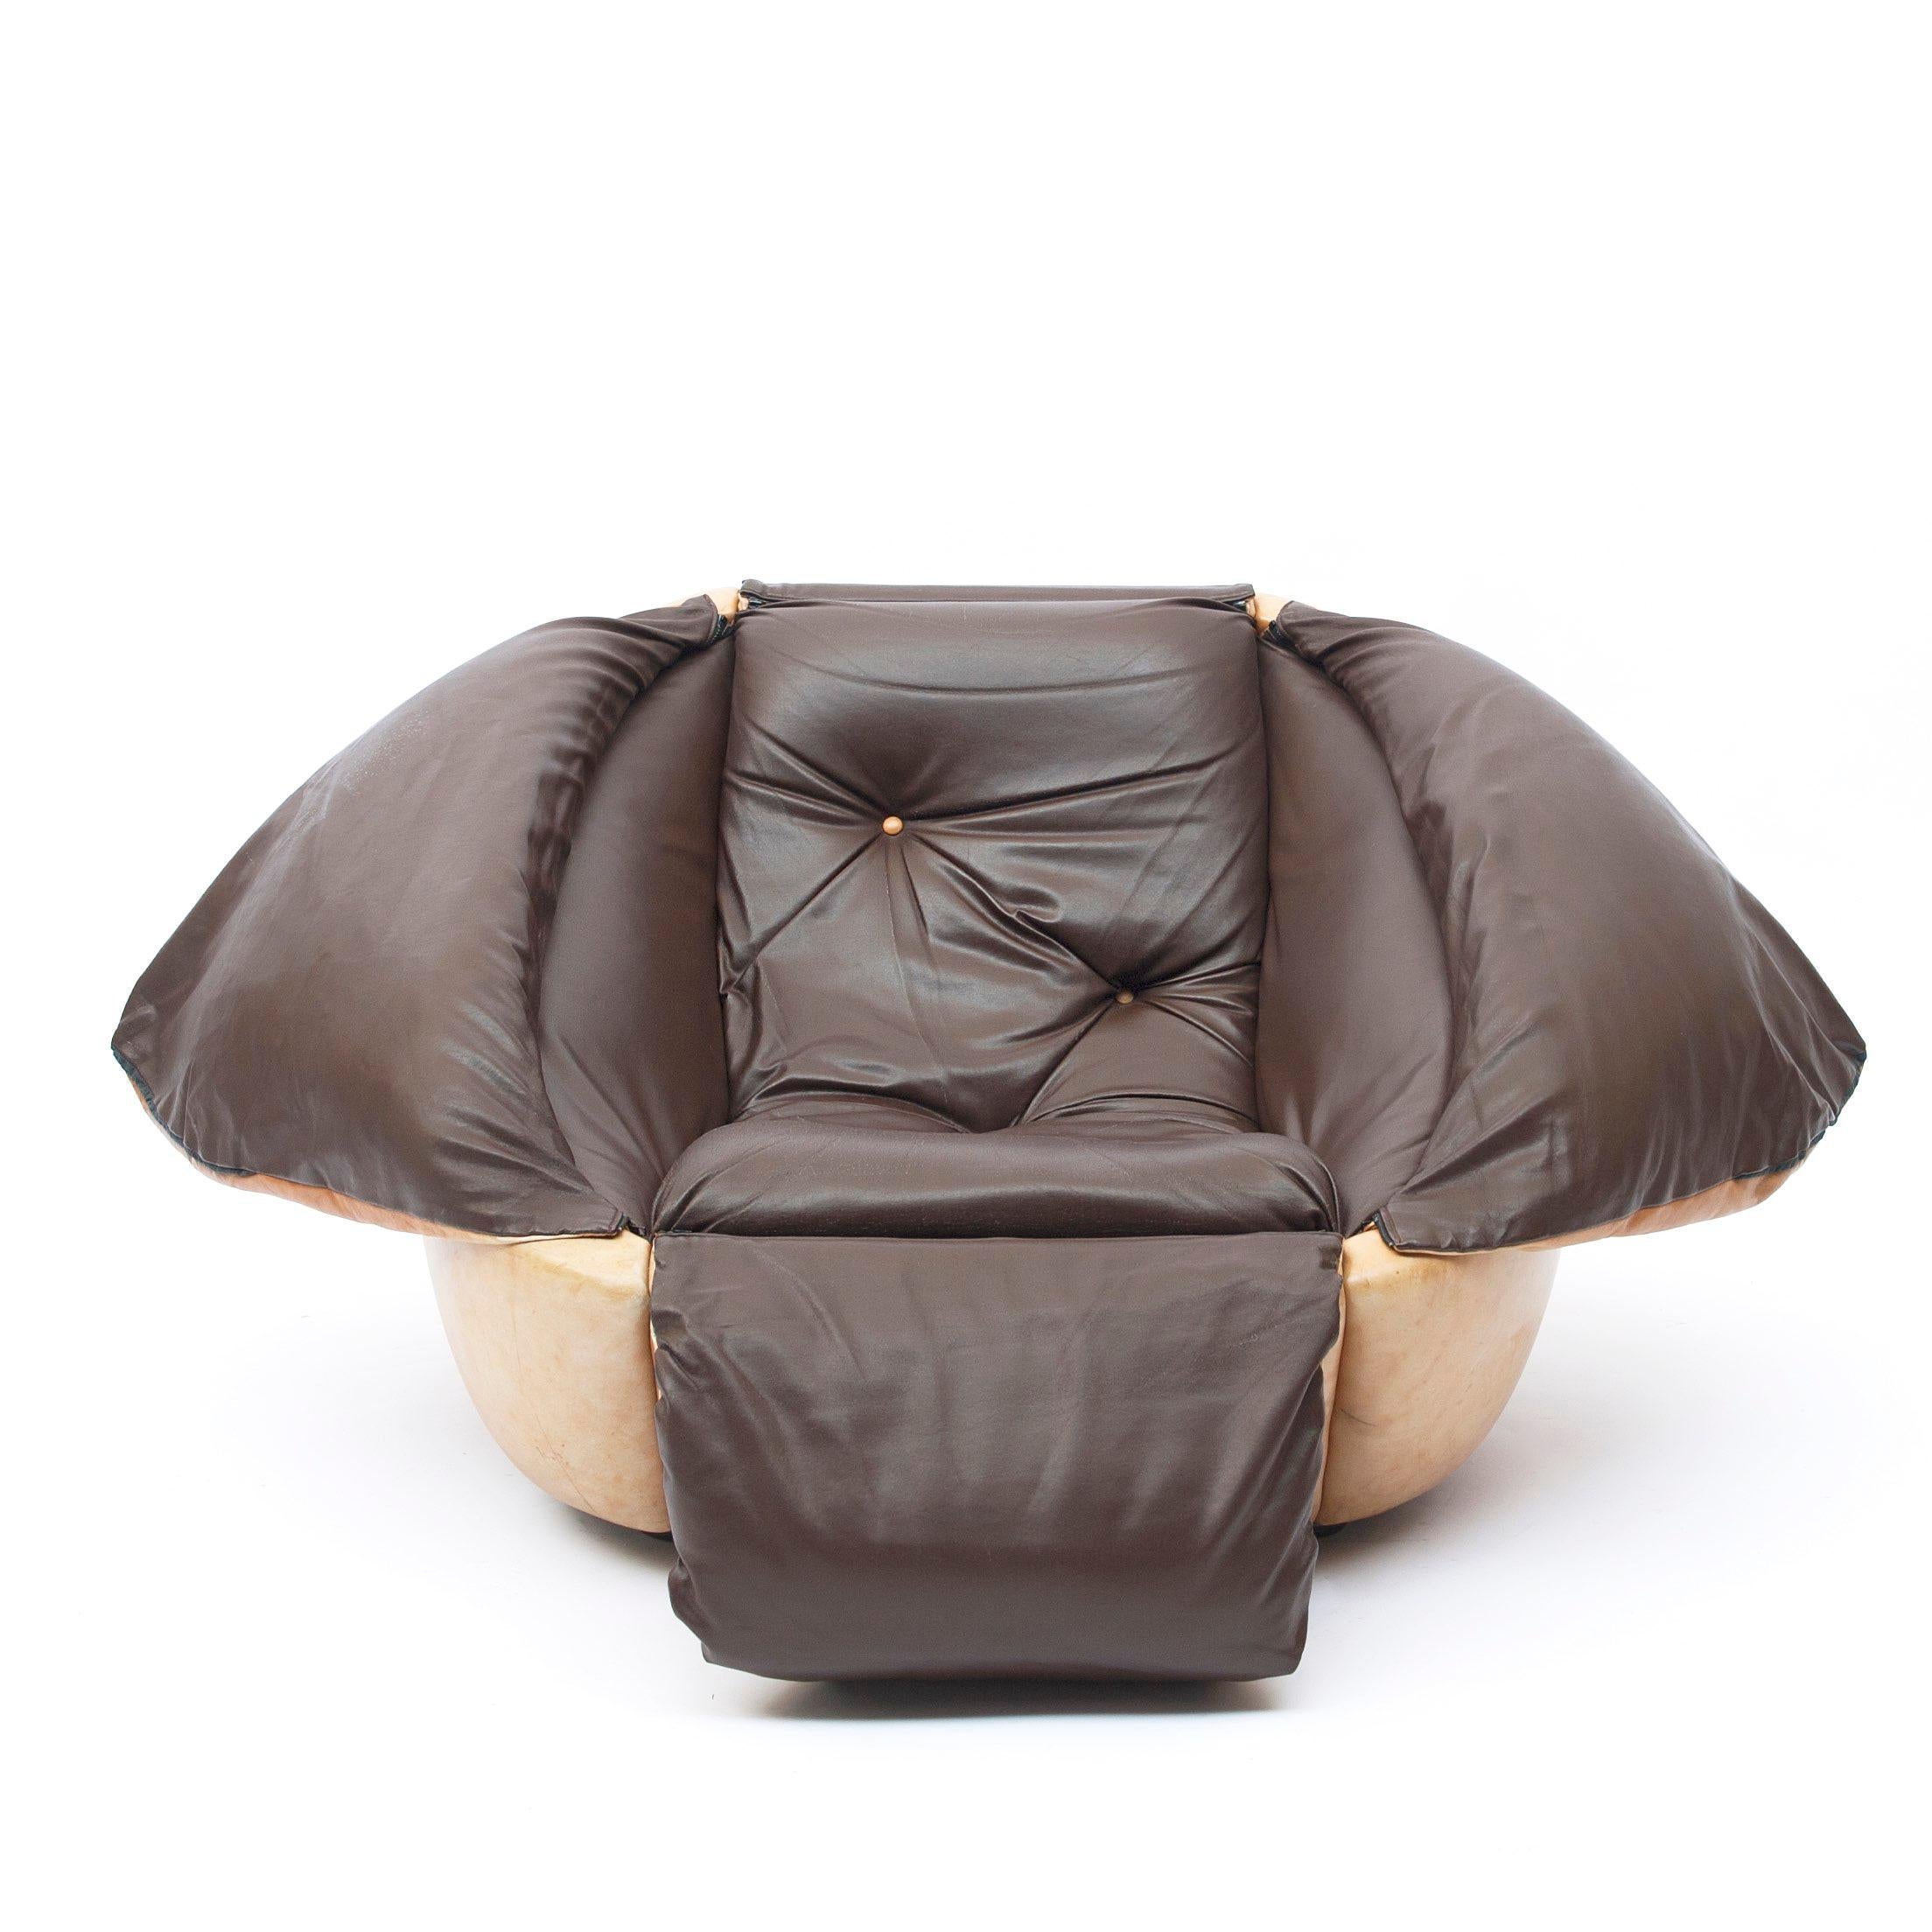 Italian Space Age Lounge Chair in Natural Leather, 1970s For Sale